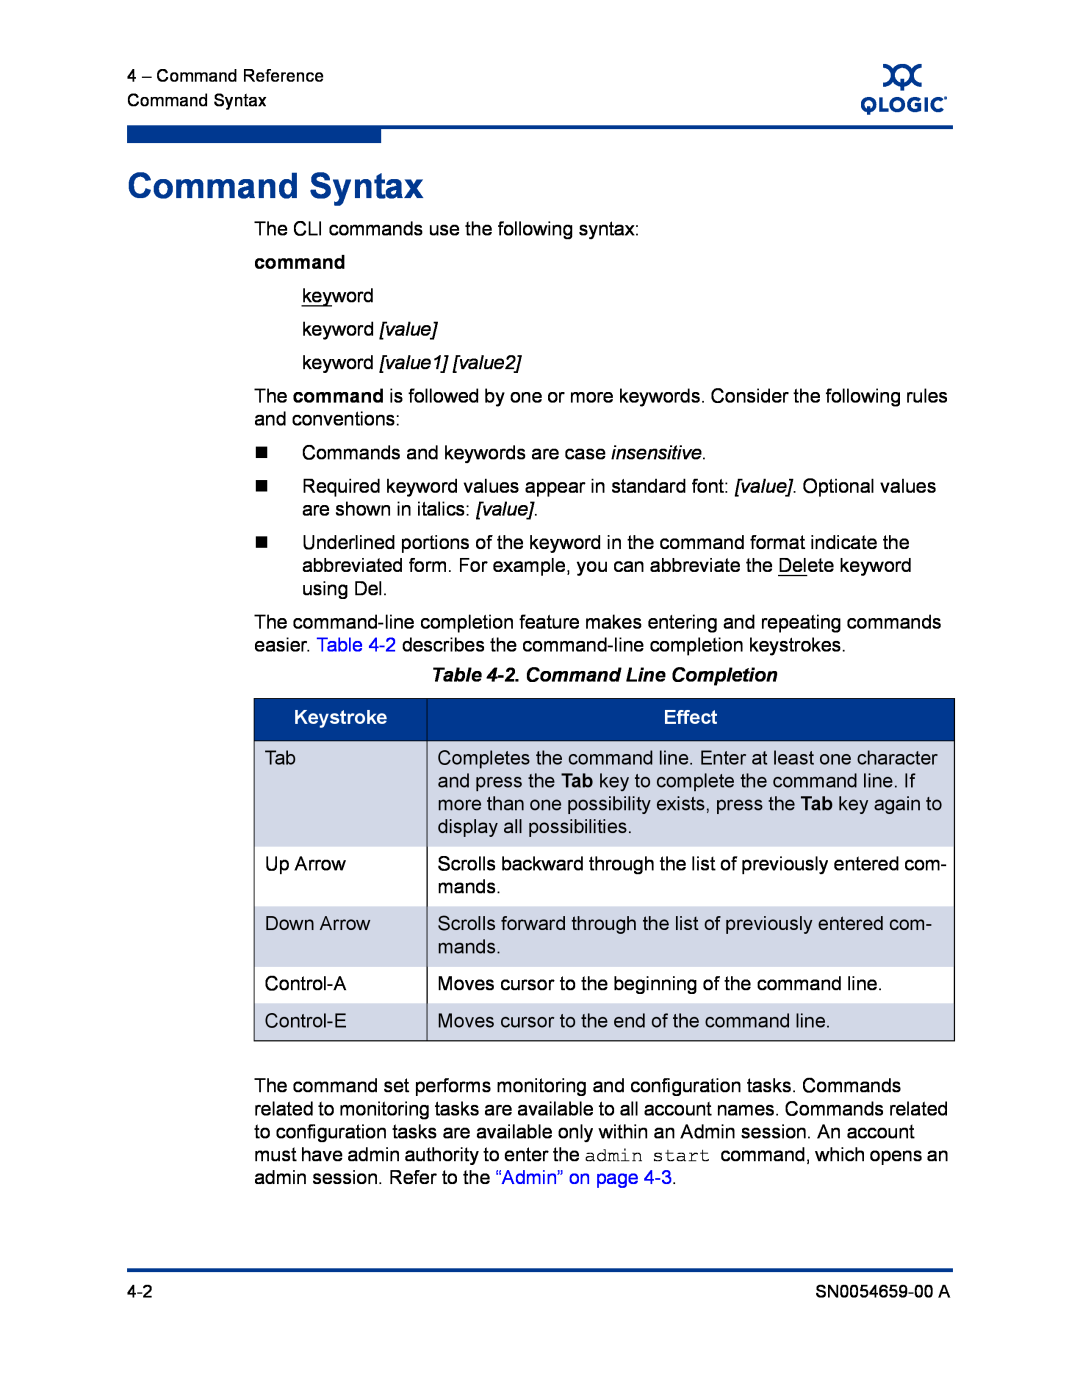 Q-Logic ISR6142 manual Command Syntax, 2. Command Line Completion, Keystroke, Effect, command 